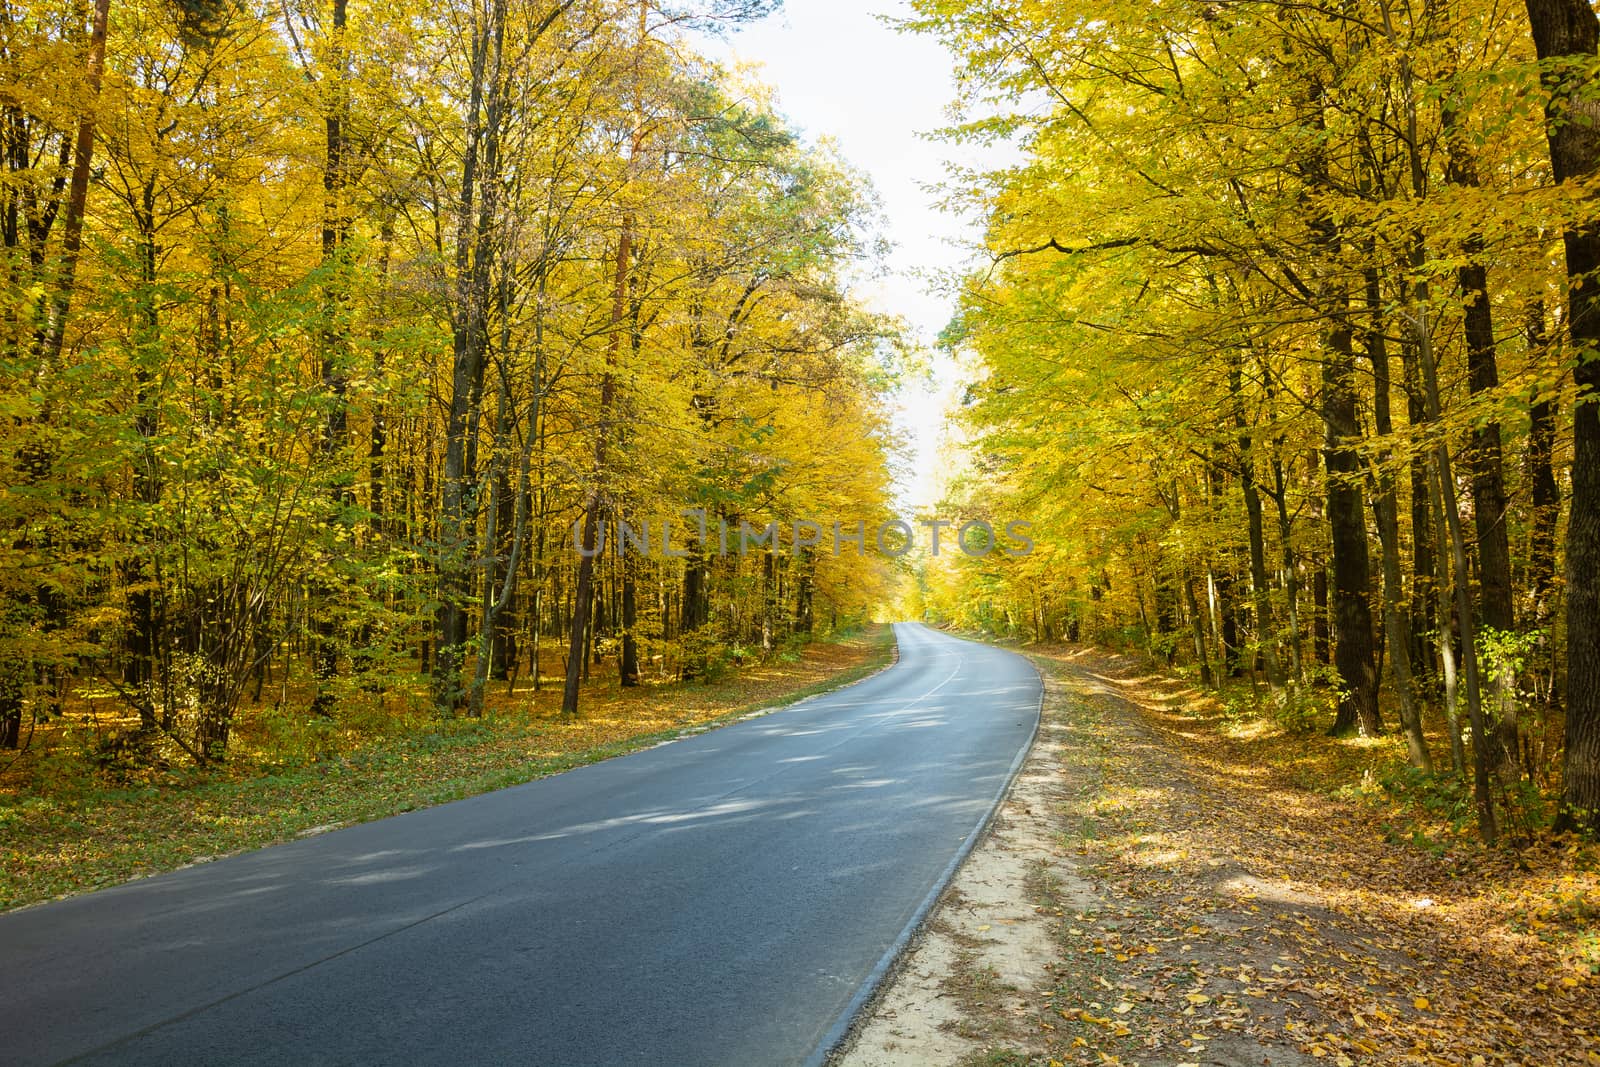 Asphalt road through the autumn yellow forest, October view